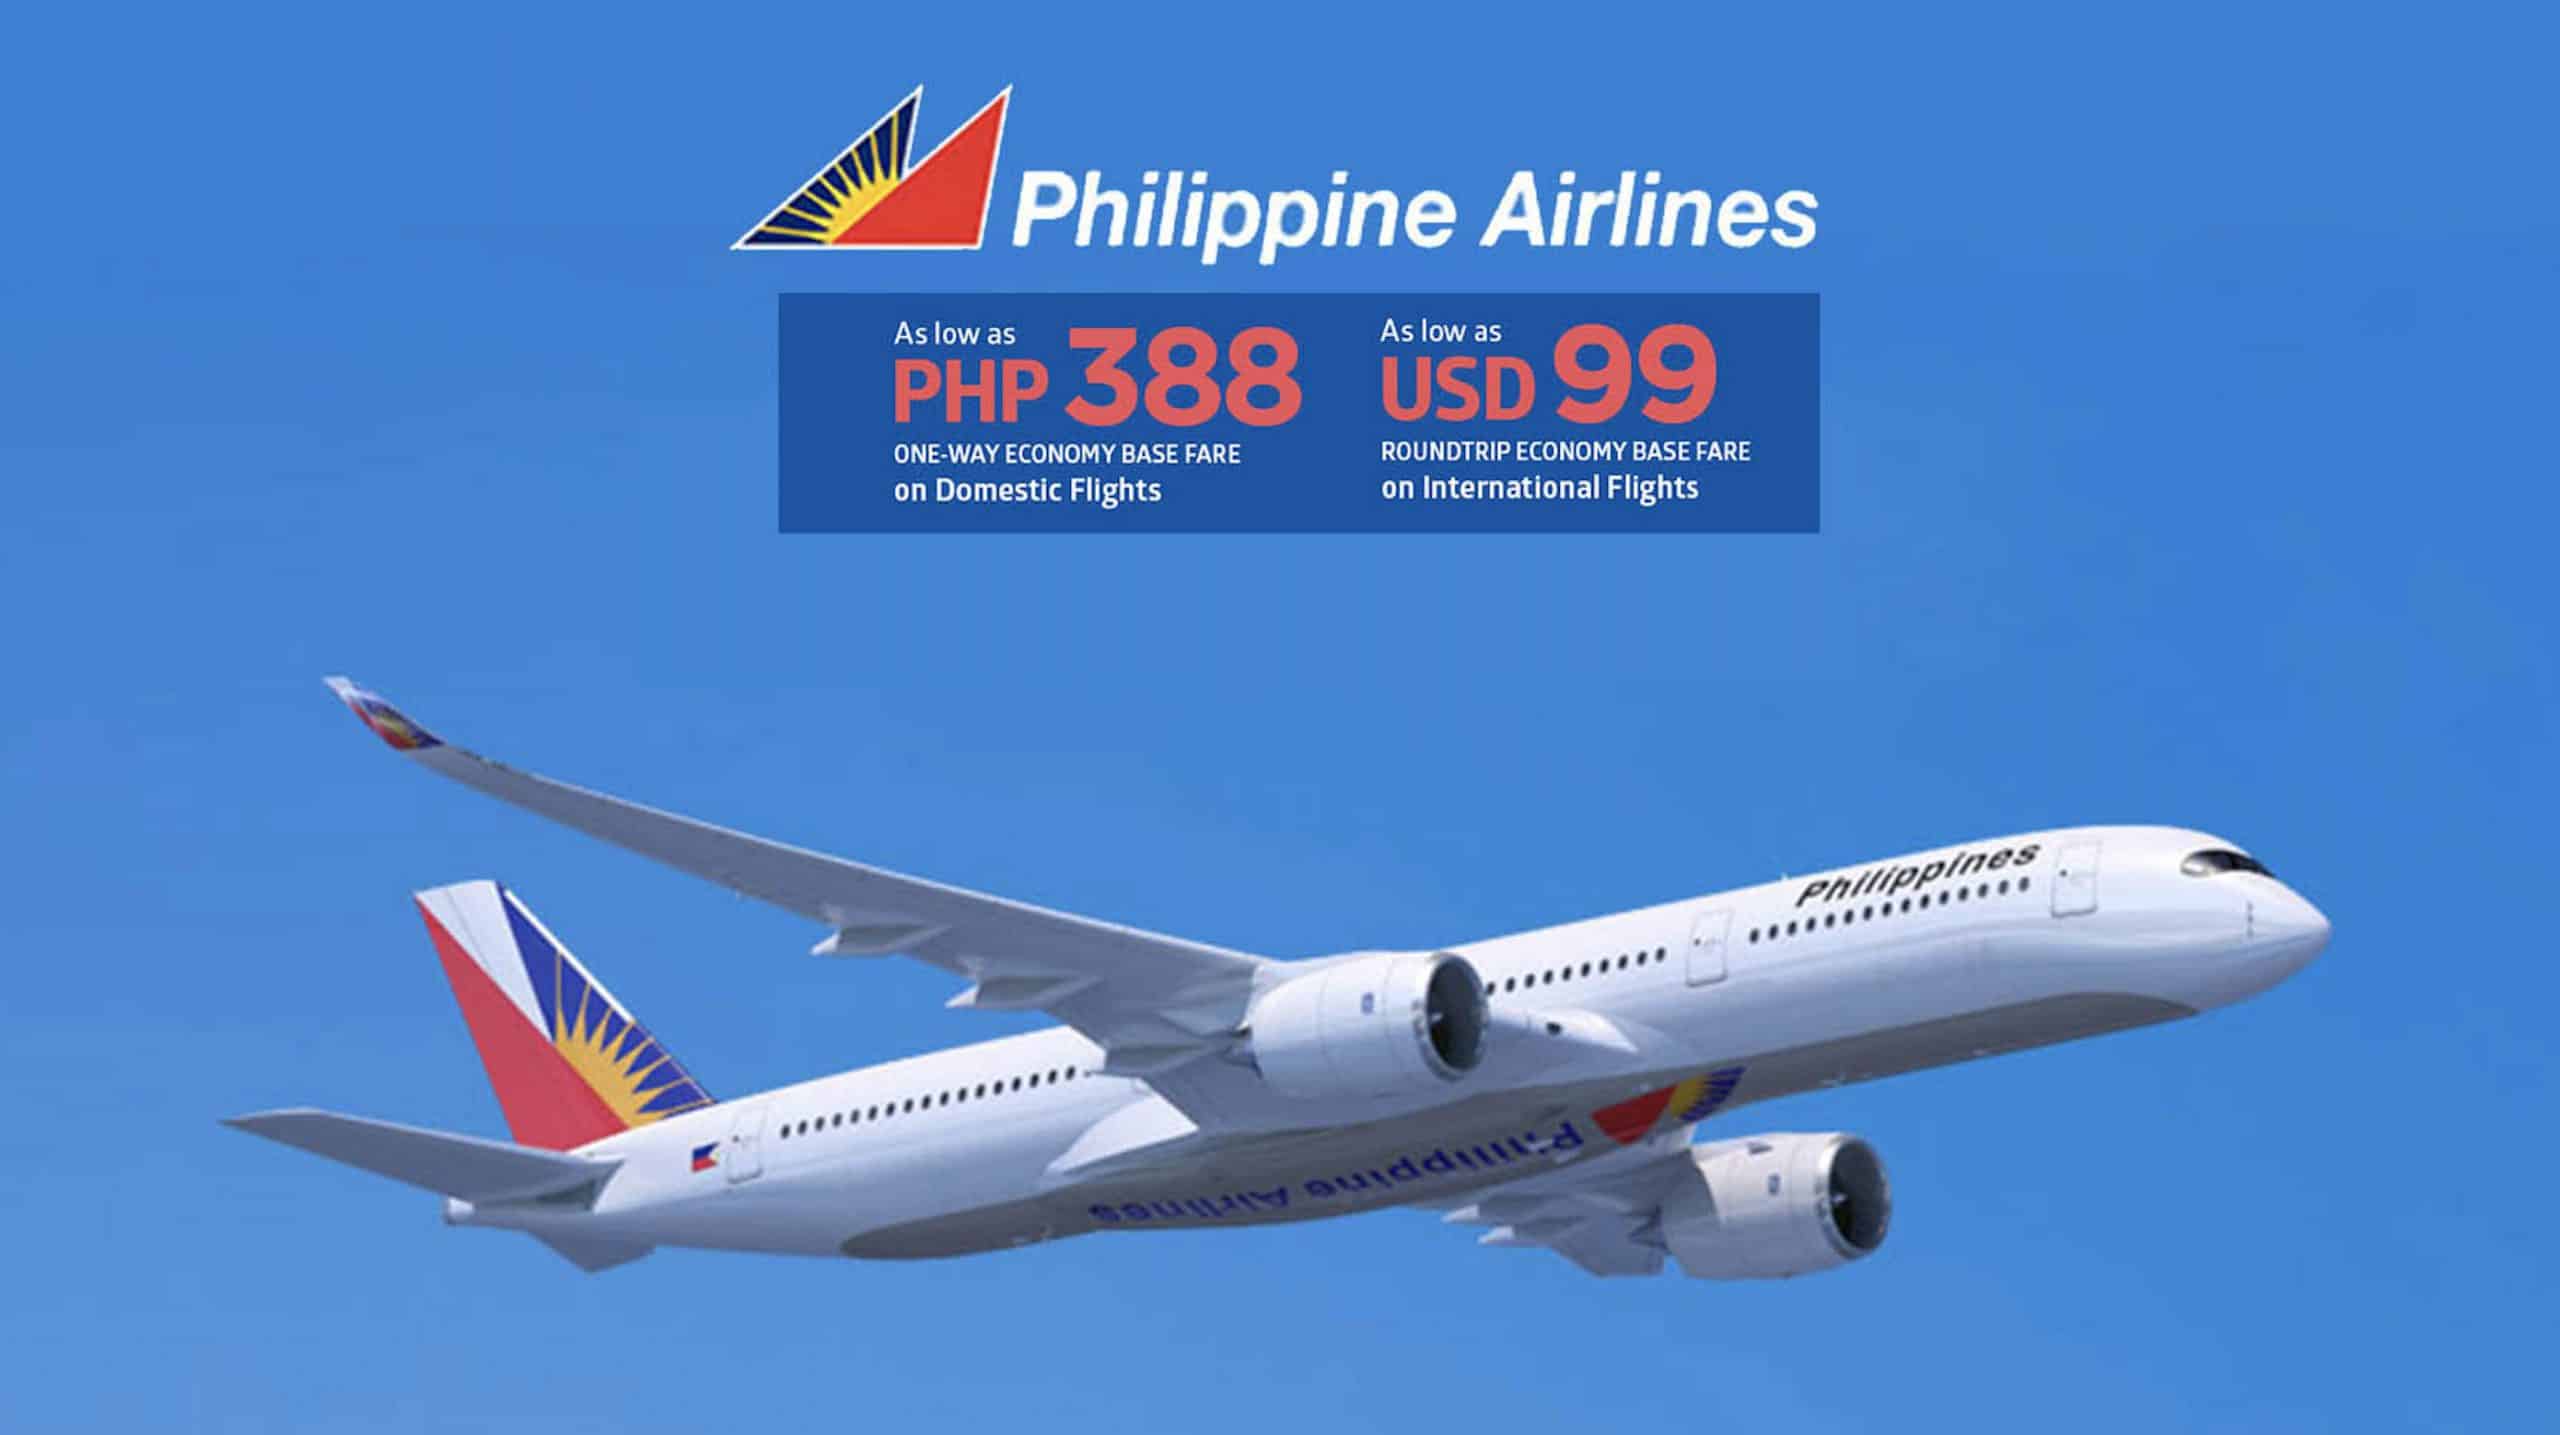 Philippine Airlines Promo How To Book, Front Desk Table Philippines Airlines